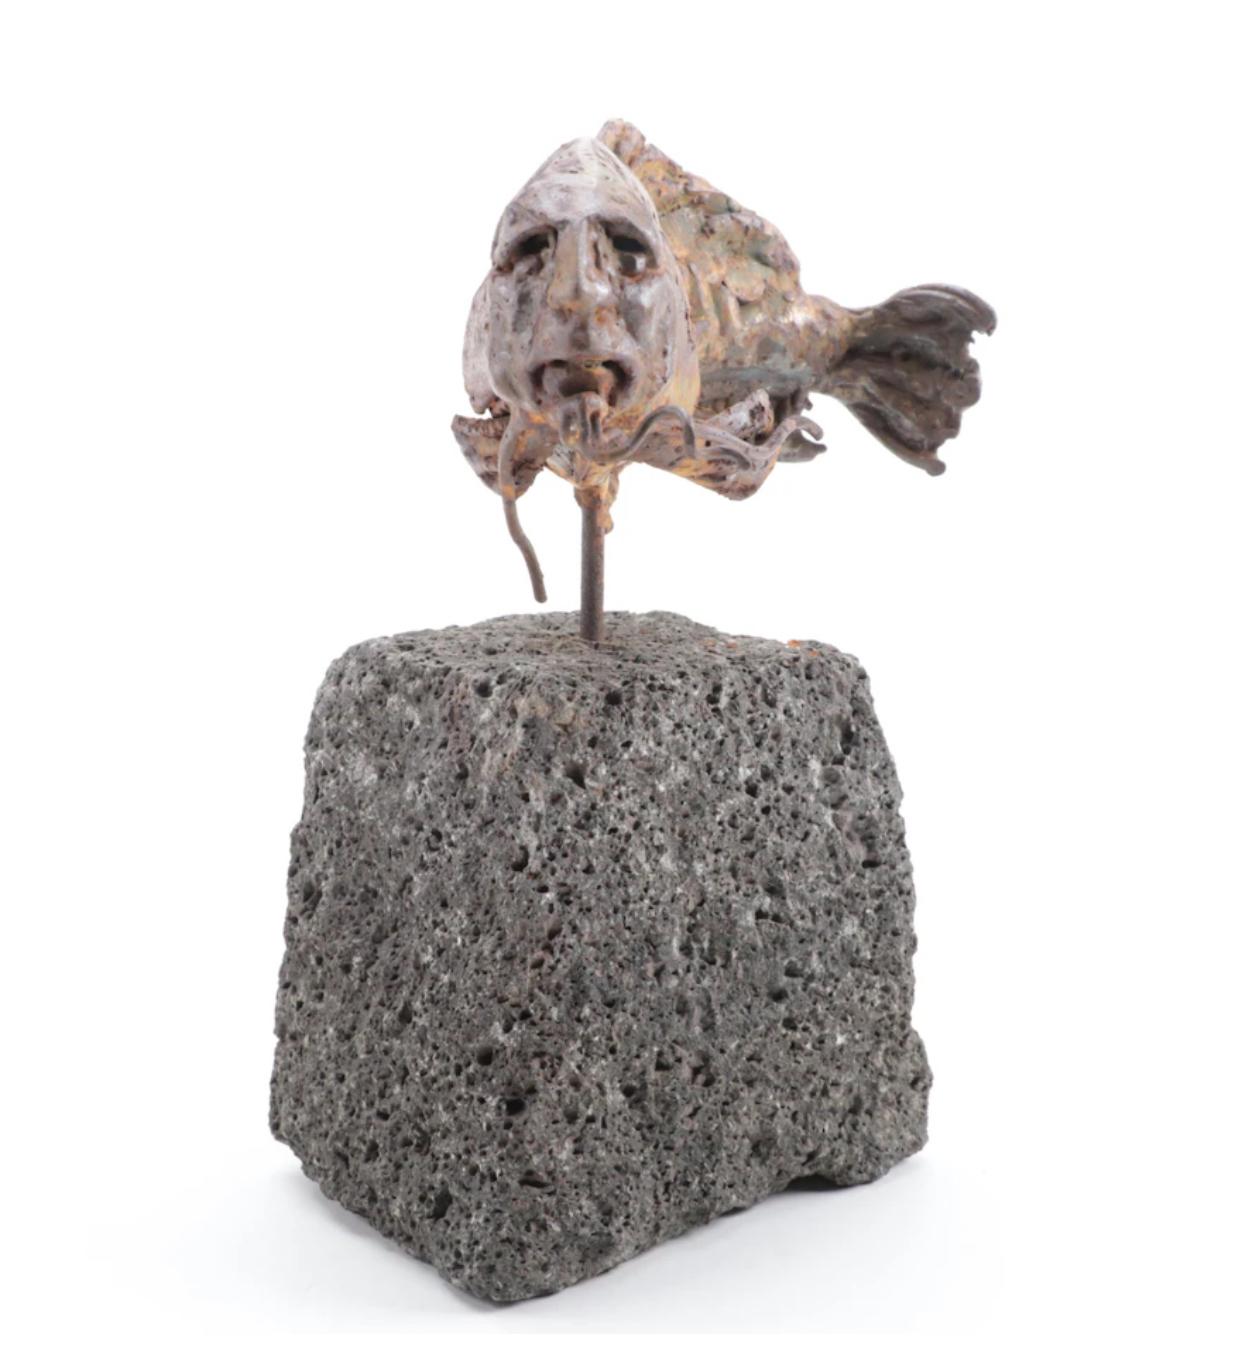 Thought provoking sculpture of a type of fish with the face of a man by Theodore Gall, 1987. Mounted on a chunk of lava rock, the fish has incredible patina that was applied by the artist, interesting catfish type feelers and the face of a seemingly